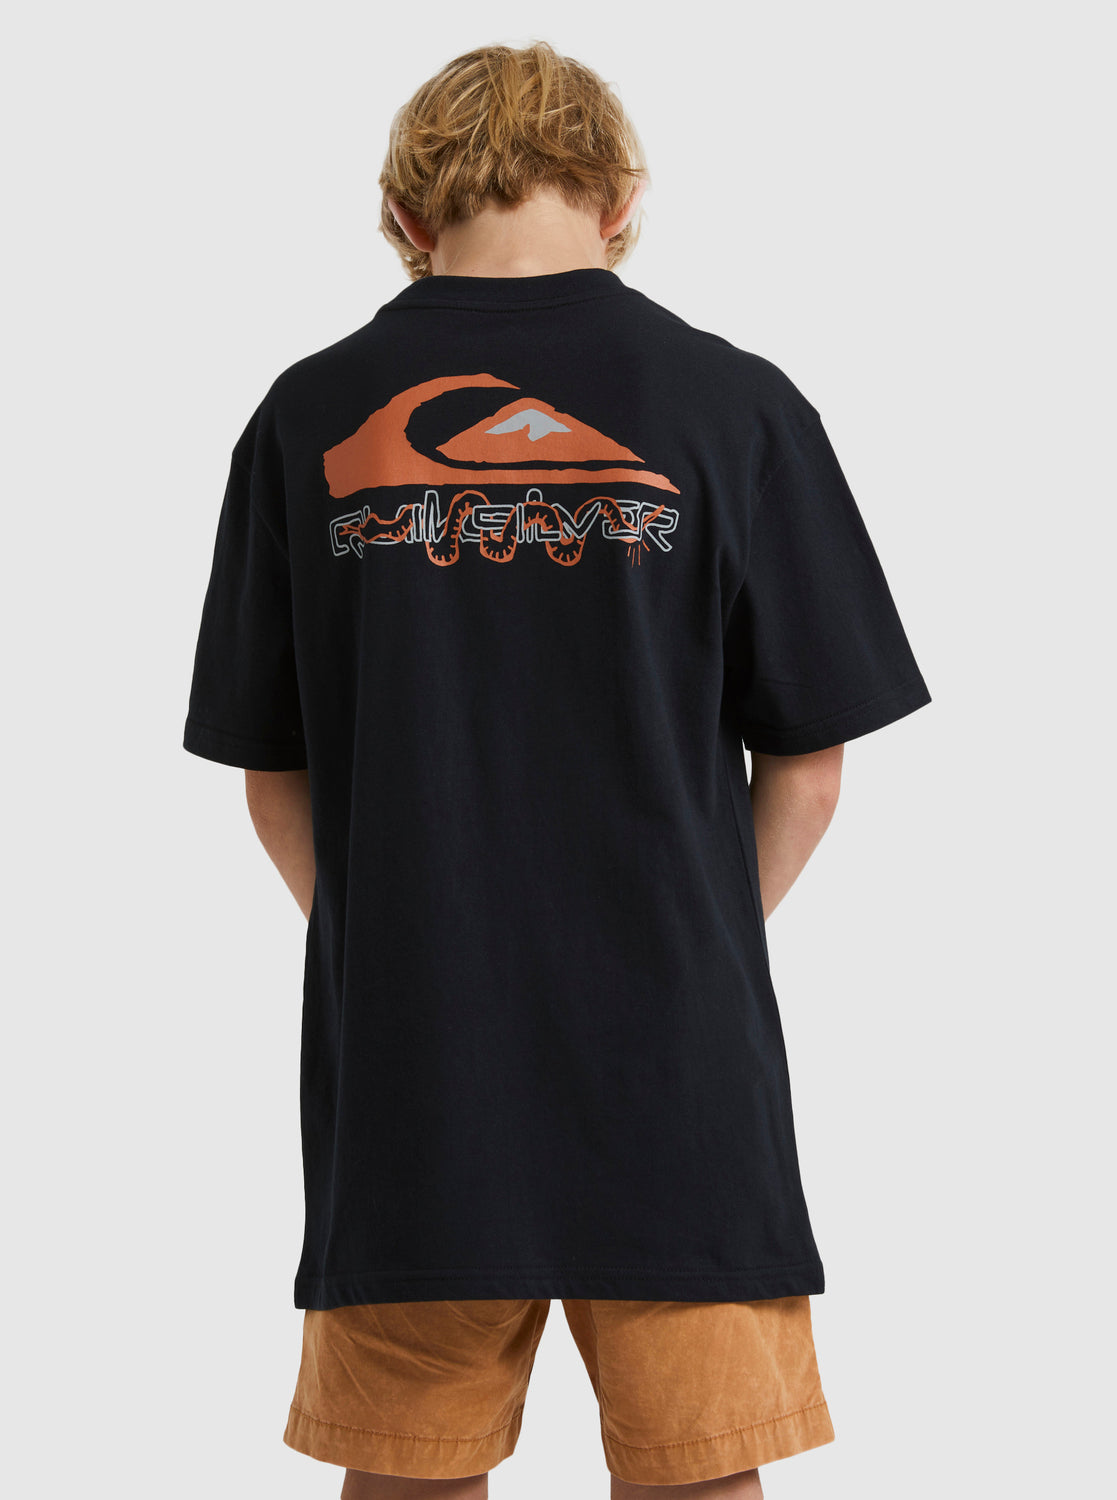 Quiksilver Omni Serpent Youth Tee black from back